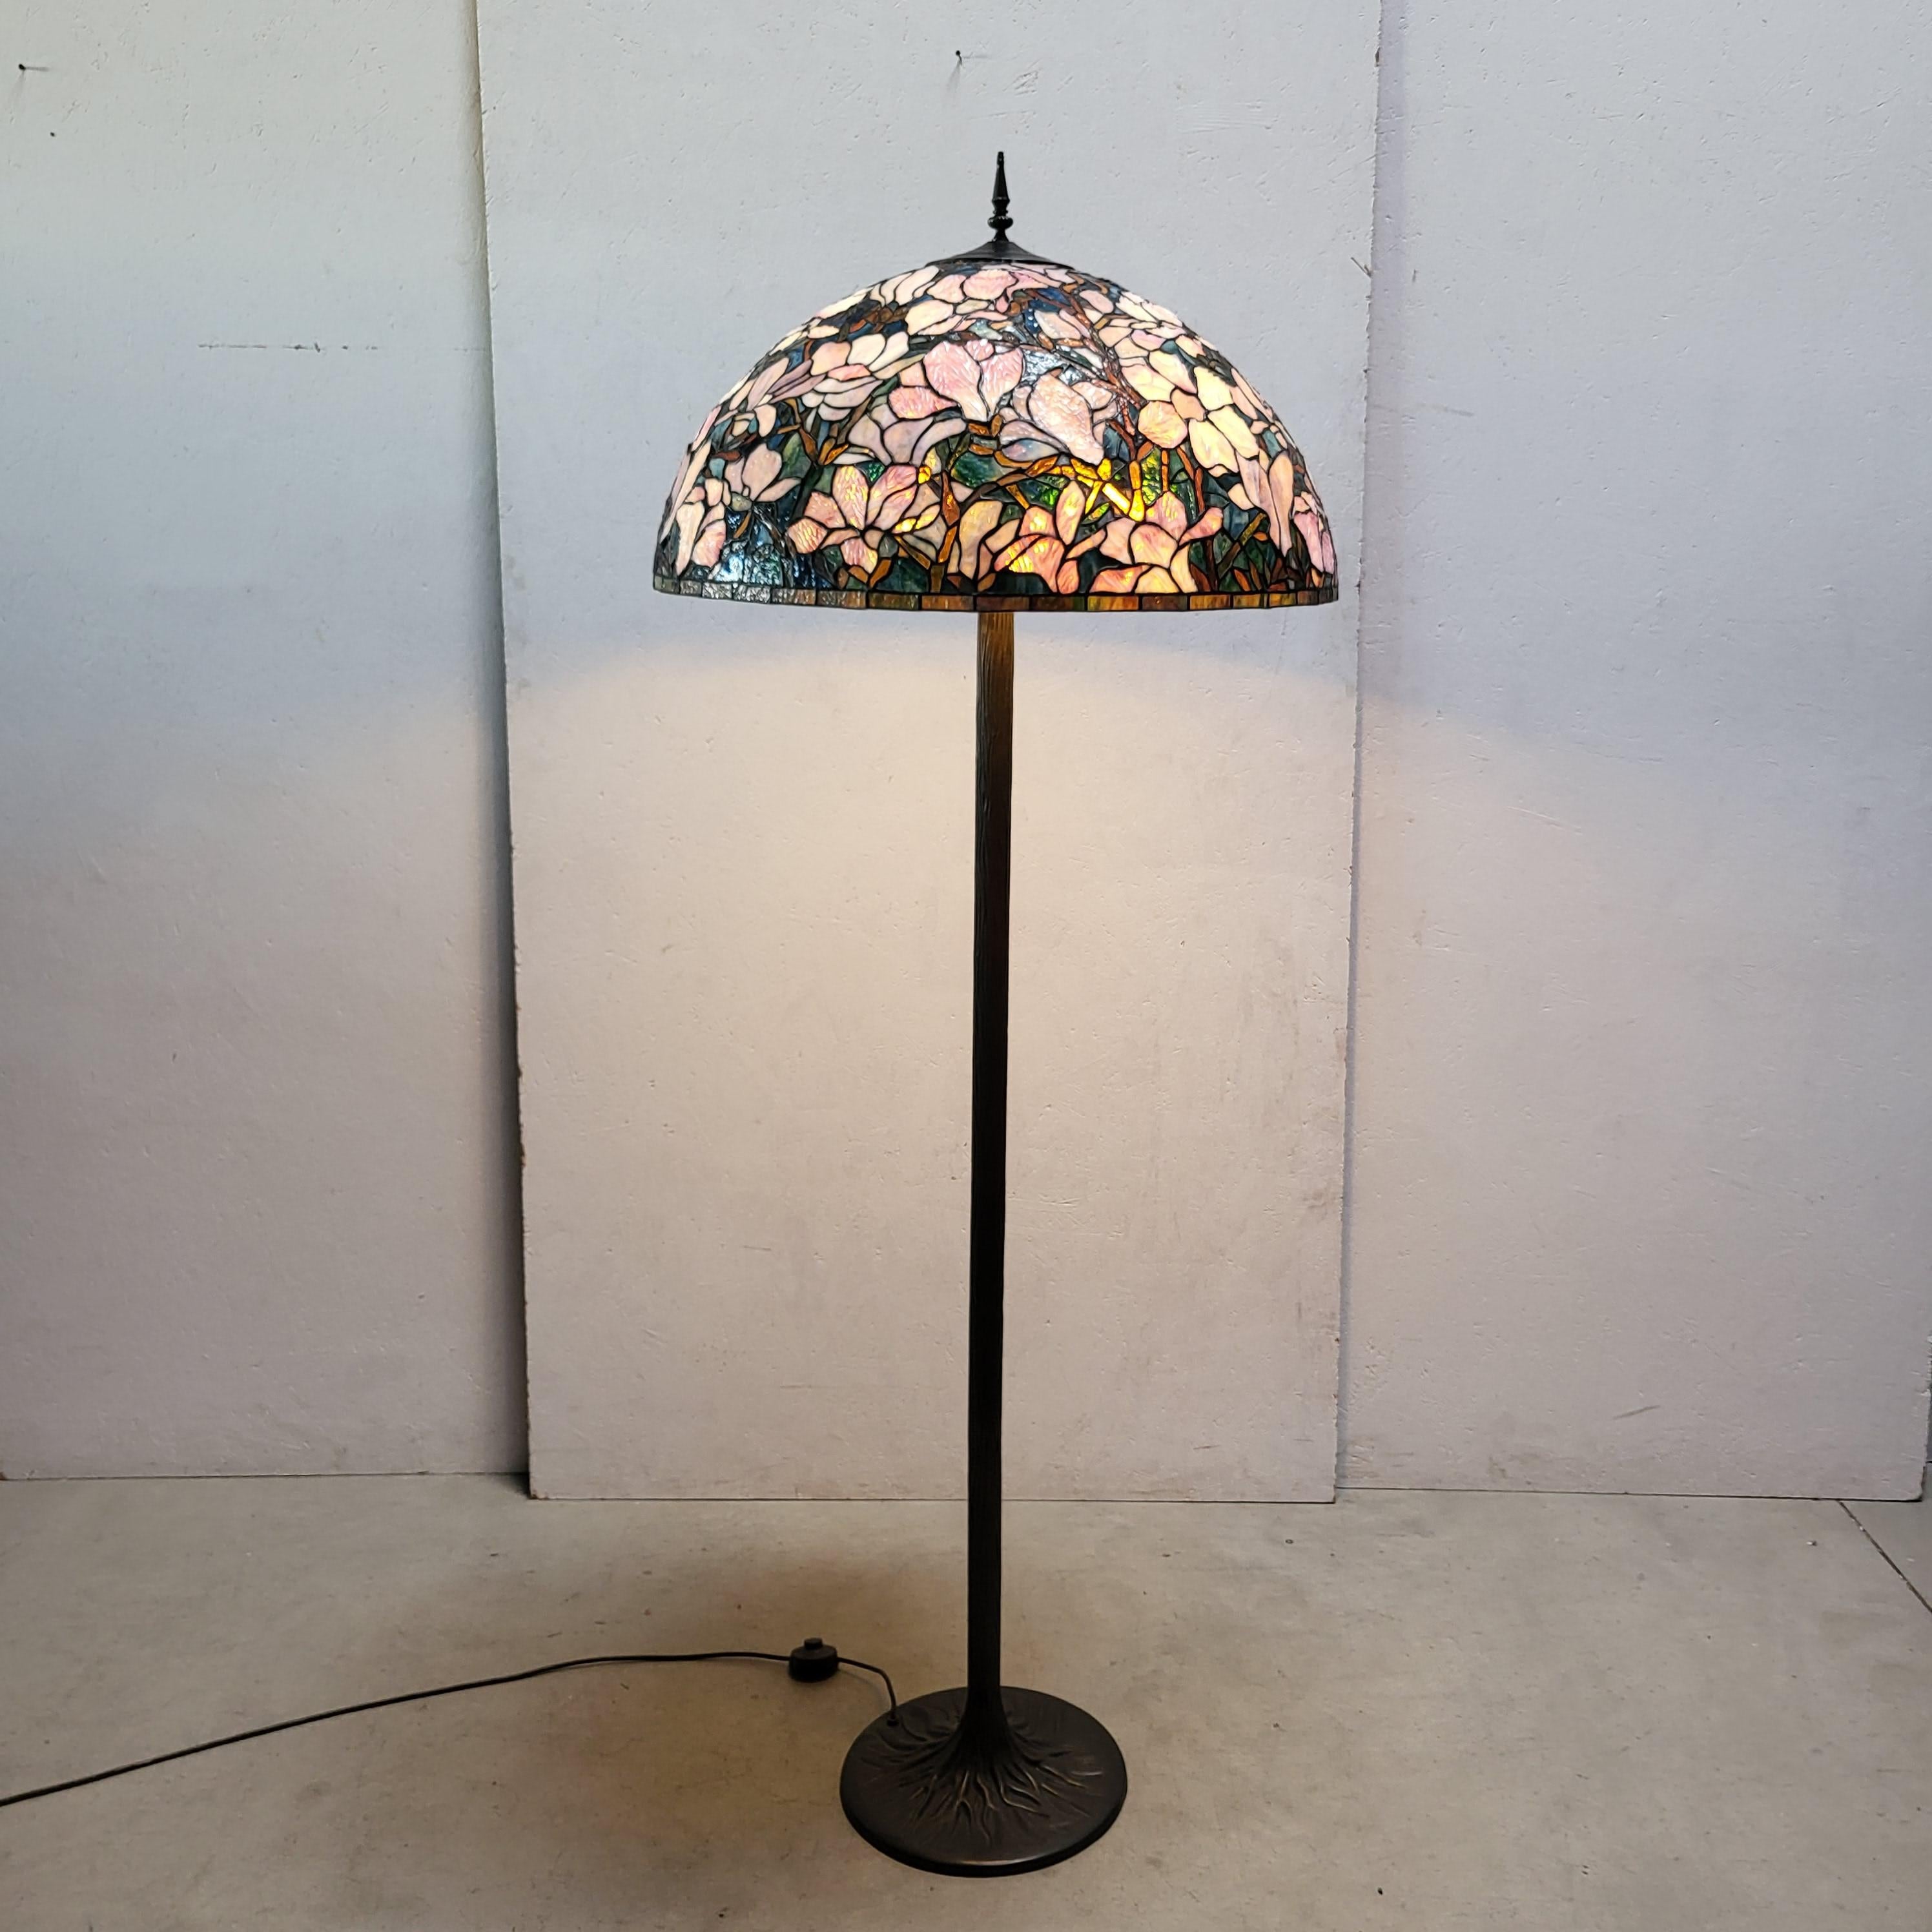 Stunning and amazing floor lamp in the manner of Tiffany Studios. 
Very impressive handmade lamp with a wonderful base.
 
Very fine handwork, colourful glass.

The lamp has an amazing warm light and is a wonderful art object.
It comes in a very good